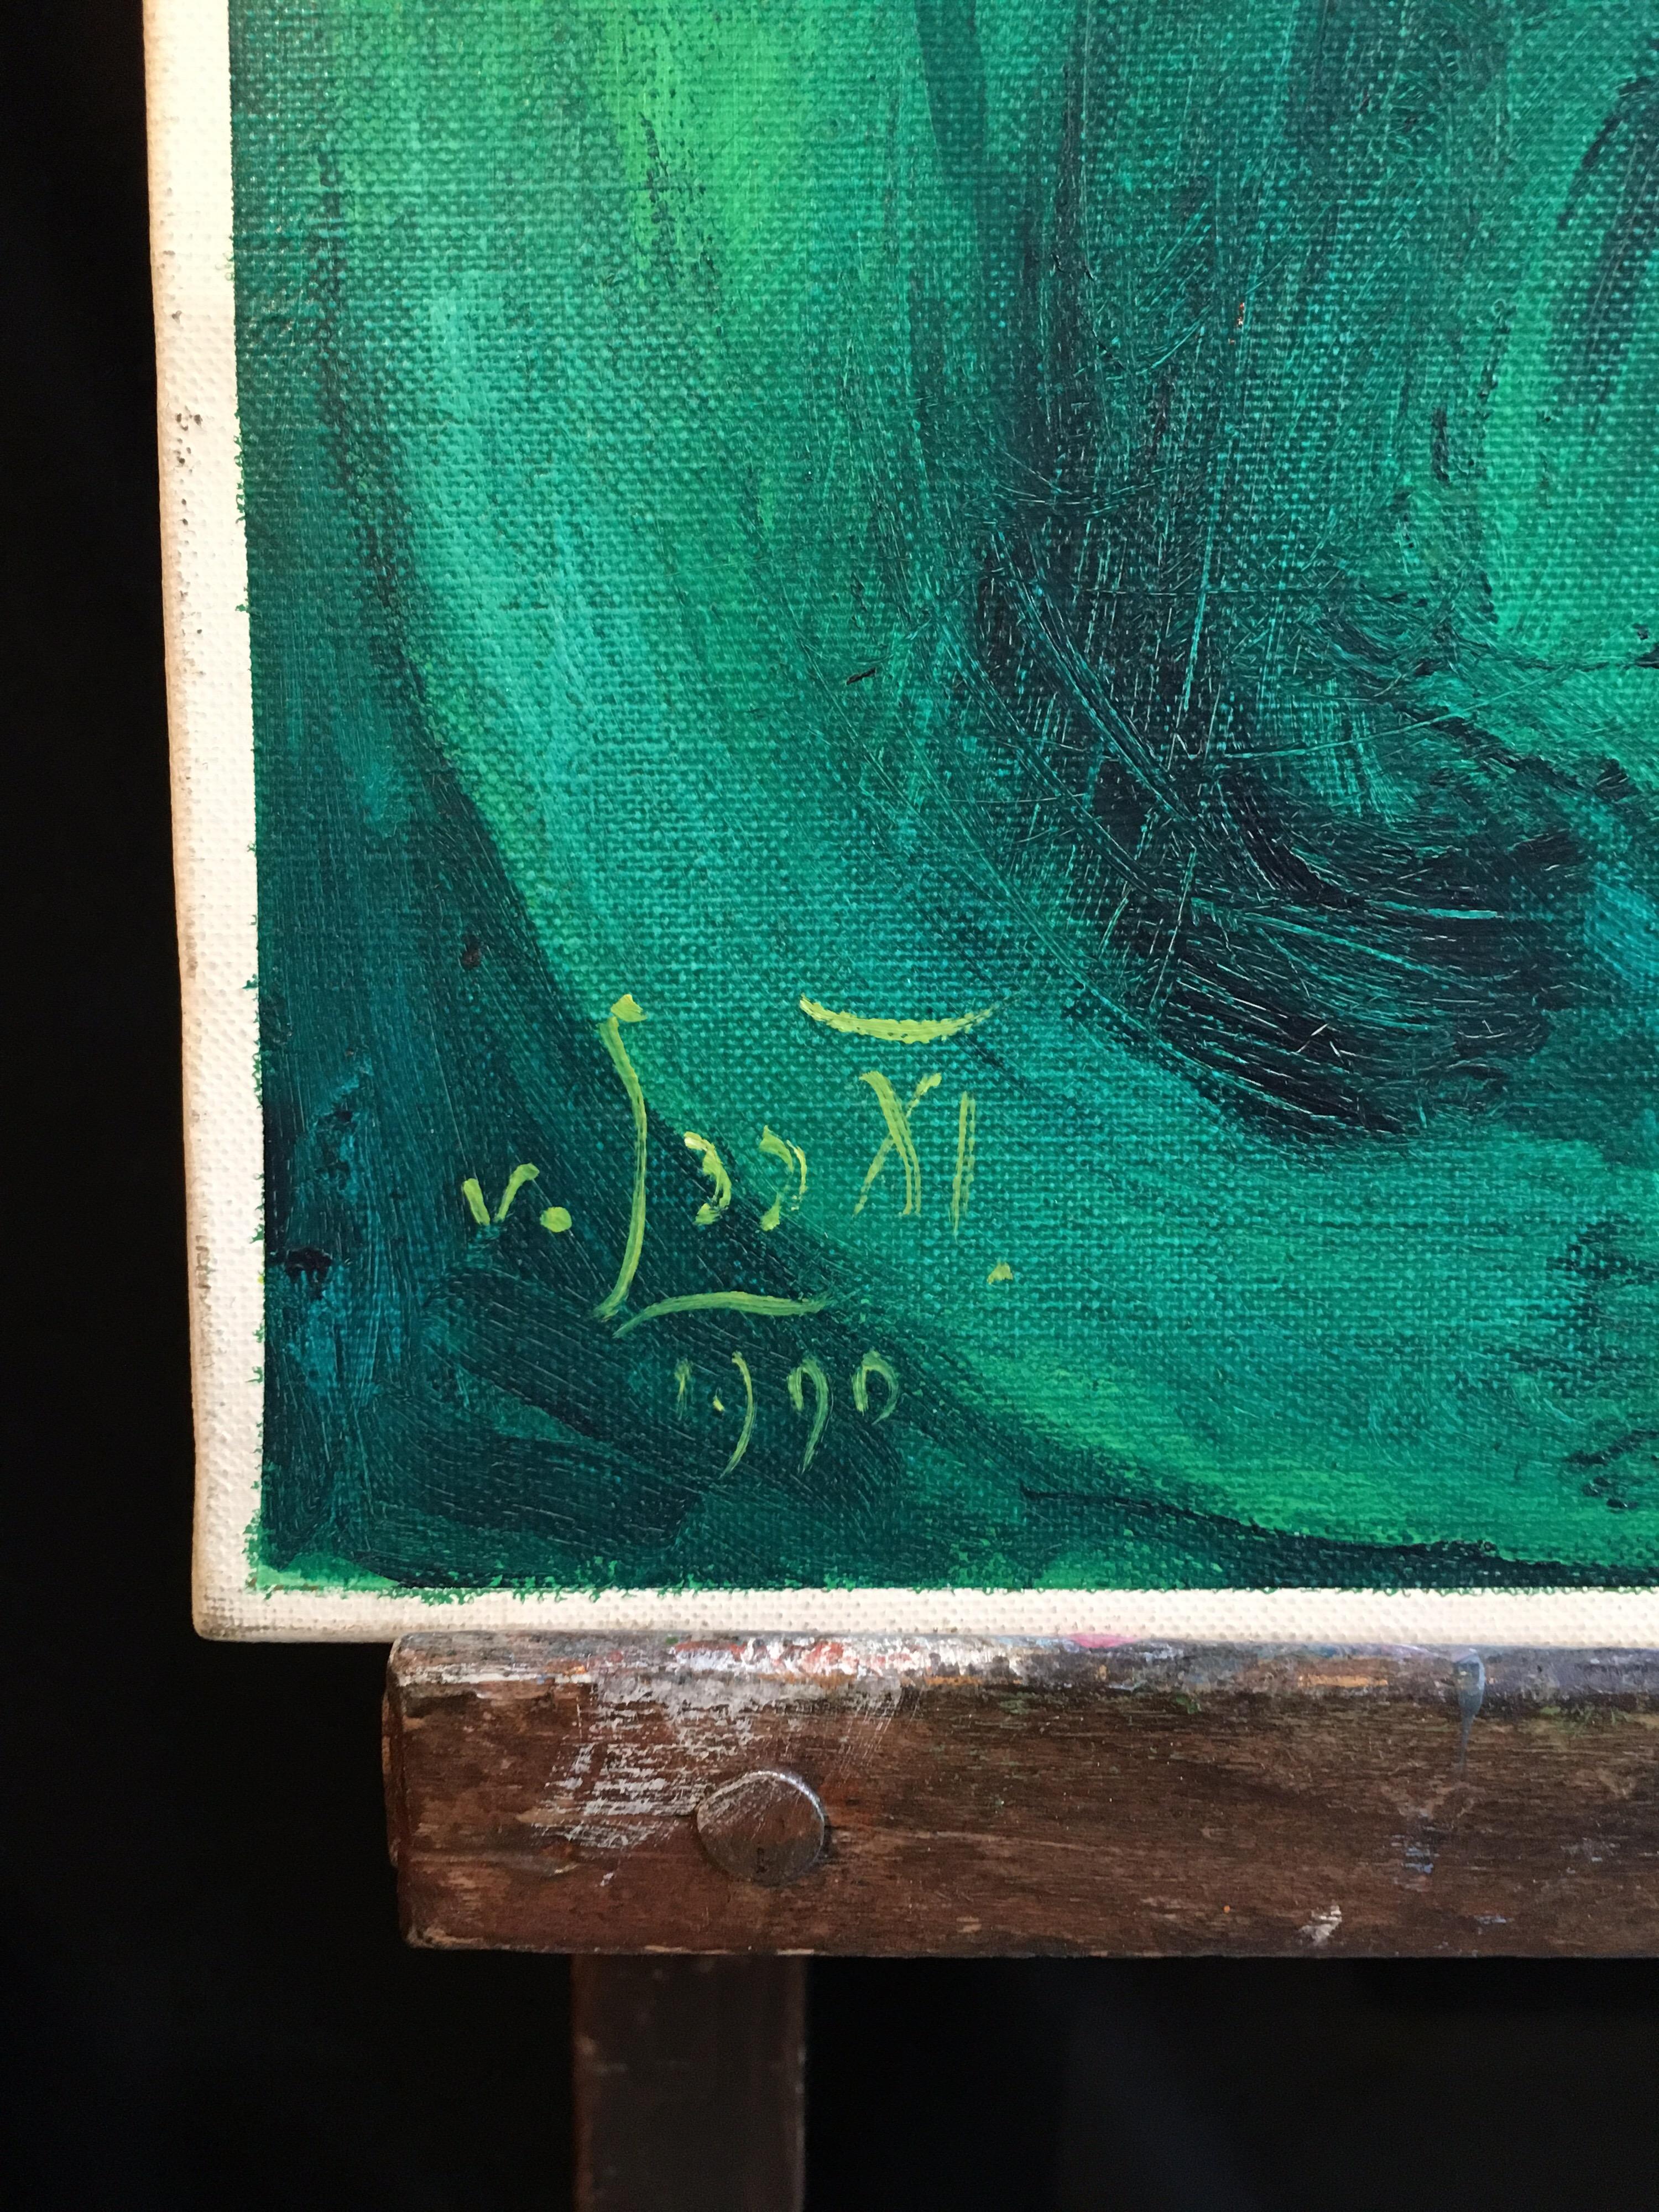 Expressive Abstract, Green Colour, Original Oil Painting, Signed
By French artist, Gustave von Loo
Signed indistinctly on the lower left hand corner and dated '1990'
Oil painting on canvas, unframed
Canvas size: 32 x 25.5 inches

Fabulous green